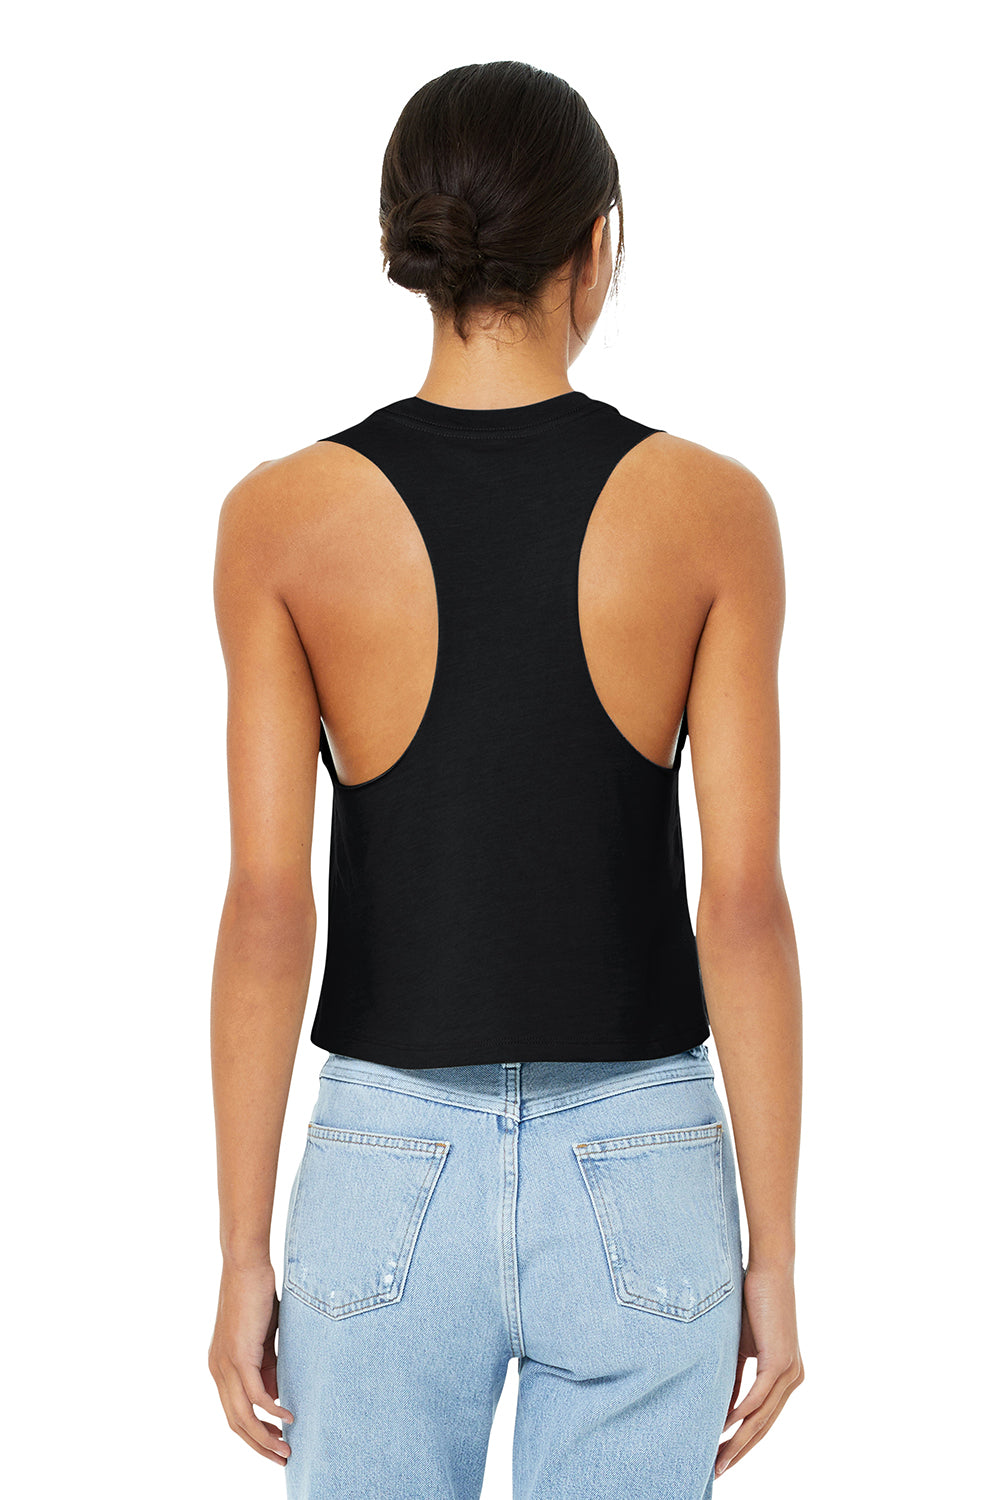 Bella + Canvas BC6682/6682 Womens Cropped Tank Top Solid Black Model Back